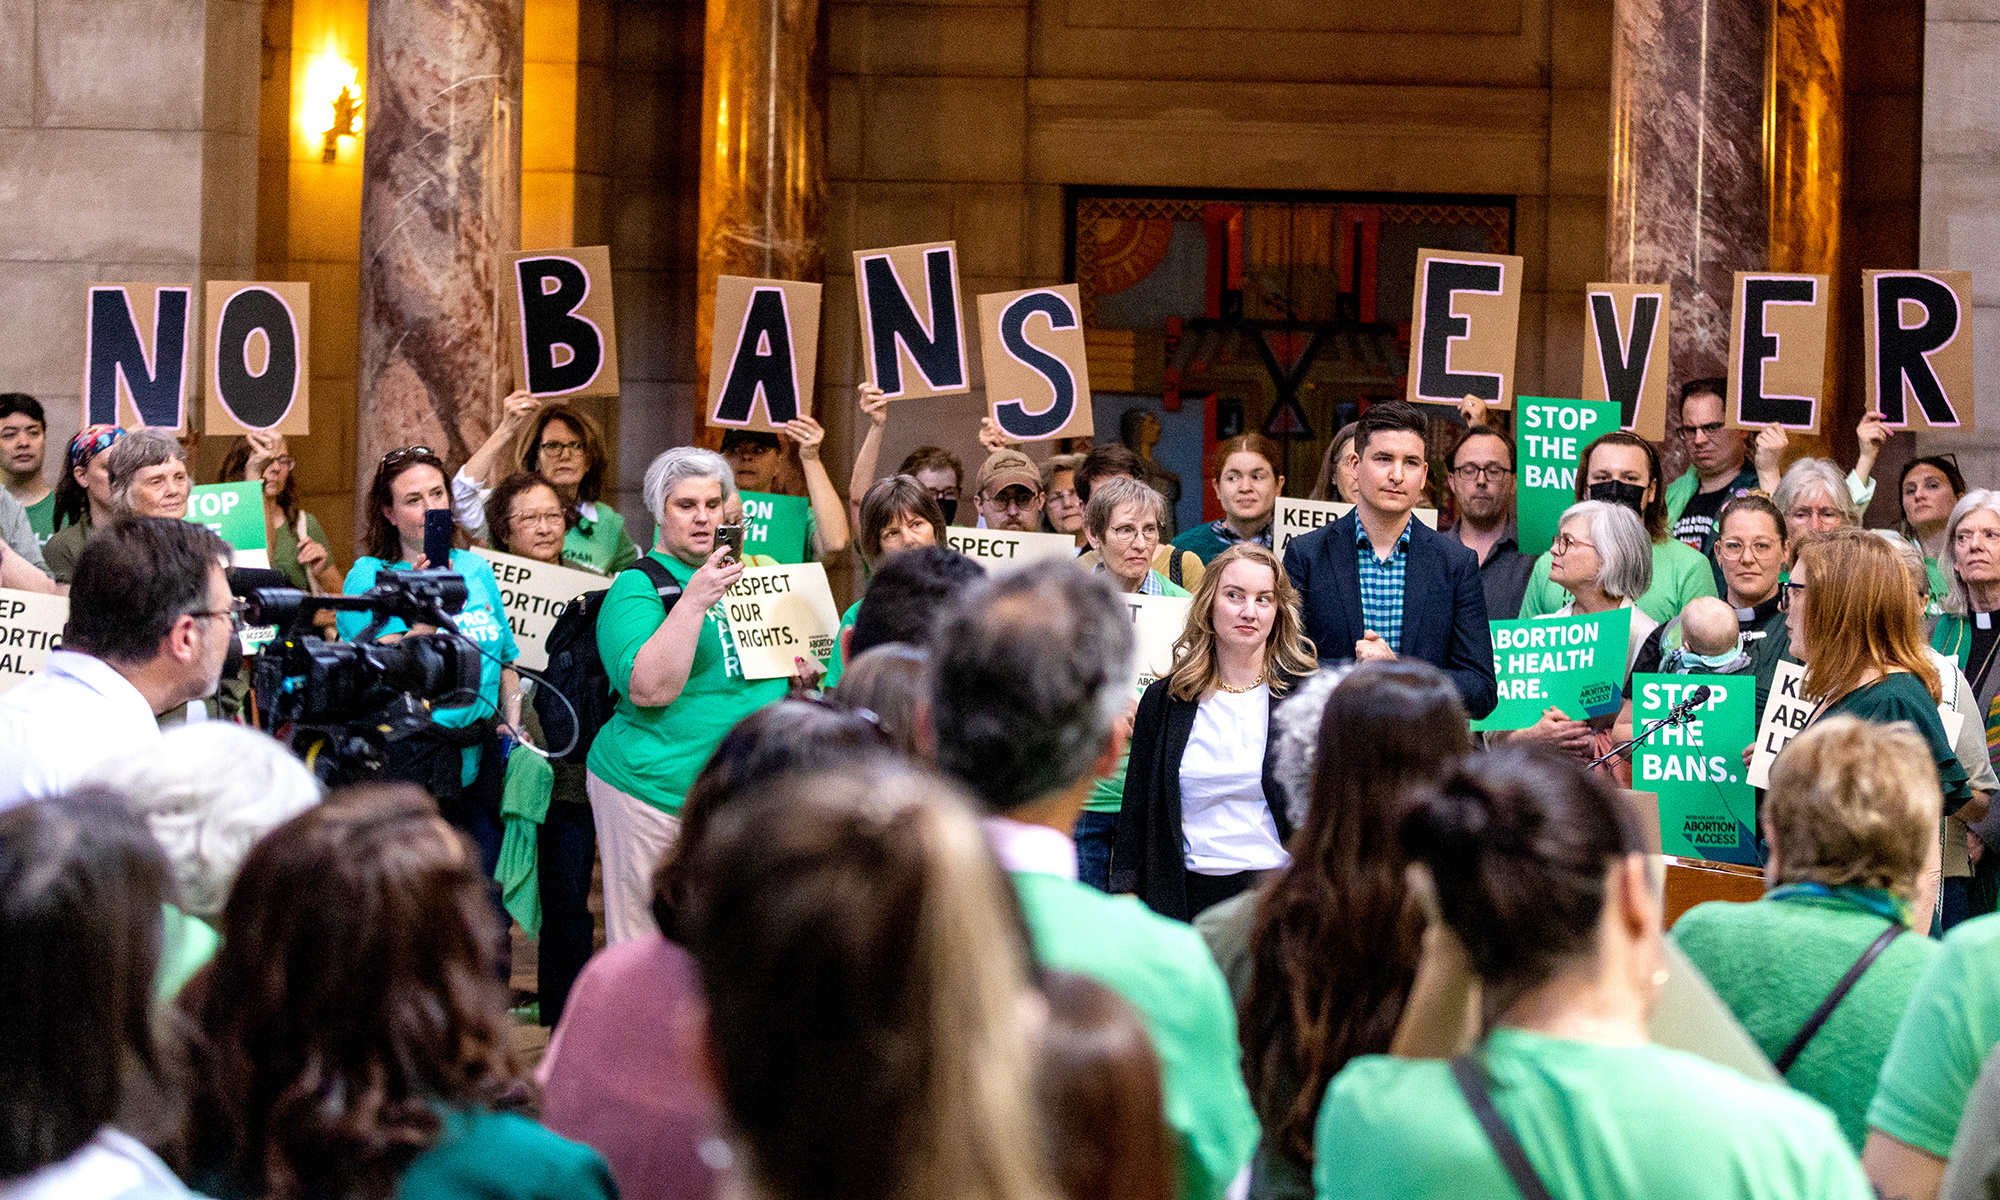 Abortion-rights advocates rally in the Nebraska Capitol rotunda on April 12, 2023, in opposition to the Nebraska Heartbeat Act, which would have banned abortion around six weeks. The bill did not pass, but a 12-week ban is now law. (Photo by Joseph Kual Zakaria/News21)